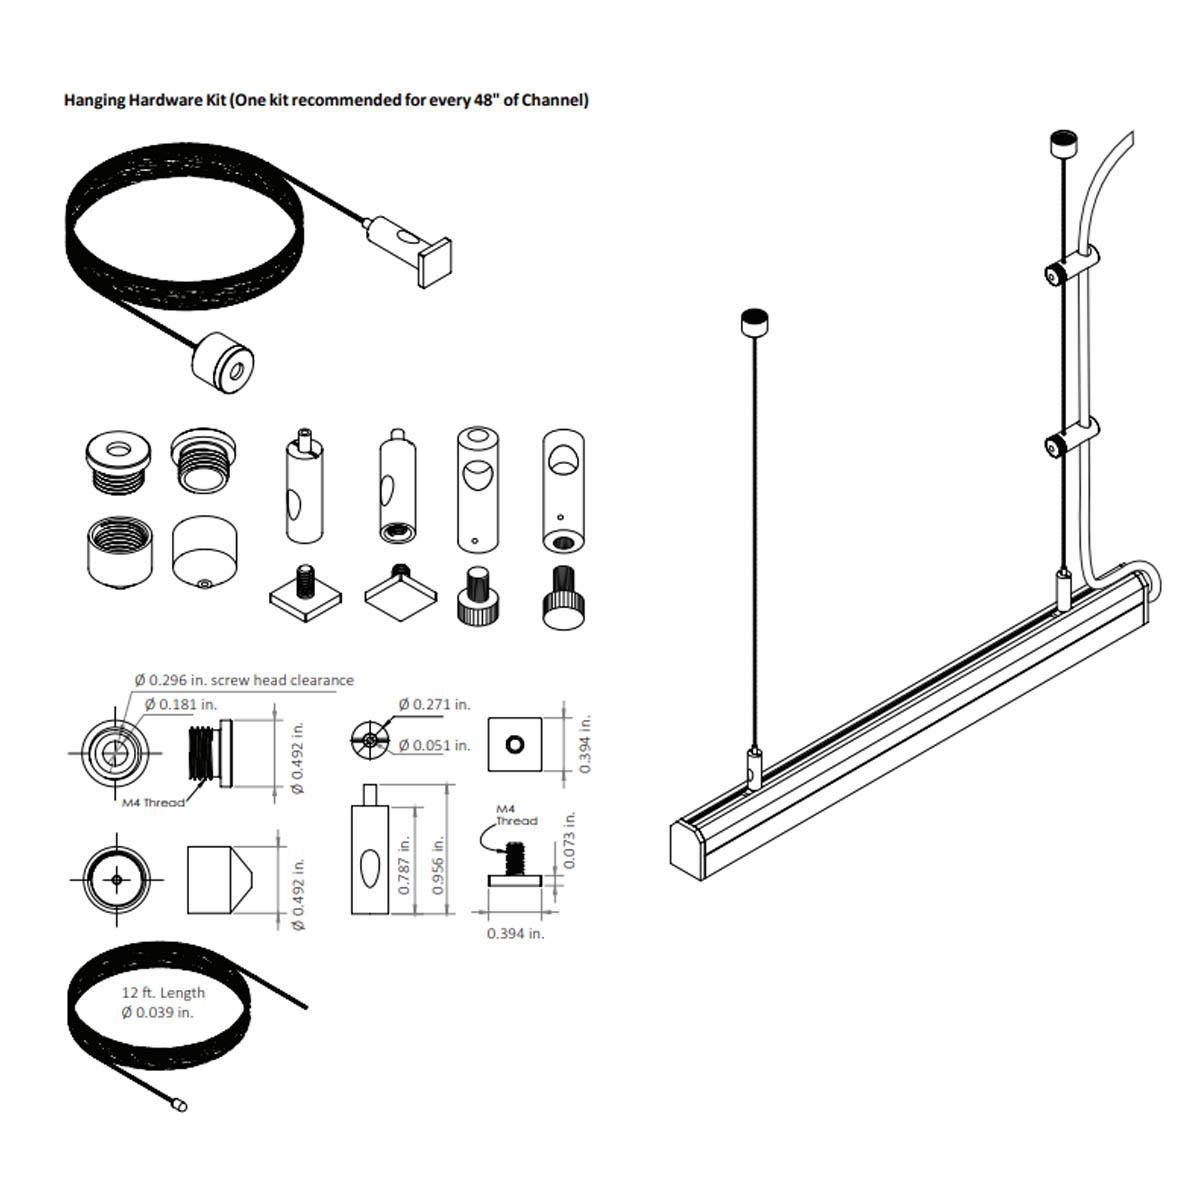 Hanging Hardware Kit, Pack of 2 hanging mounts, 2 Wire restrainers and 4 screws